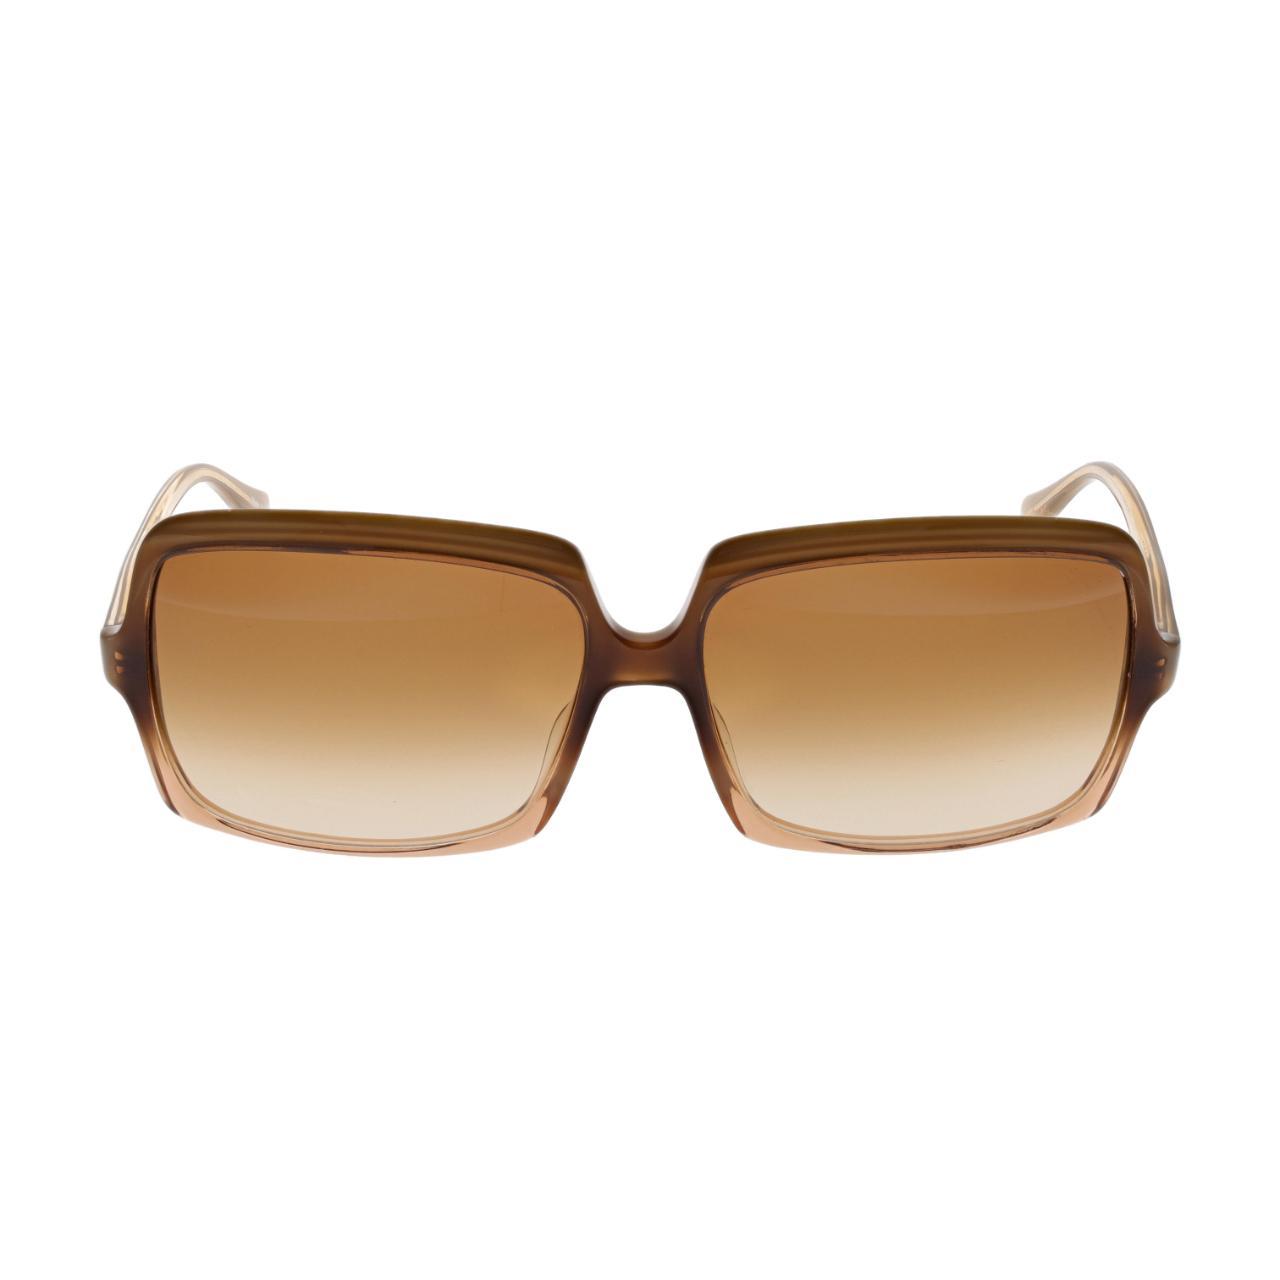 Product Image 2 - OLIVER PEOPLES APOLLONIA SUNGLASSES

Oliver Peoples